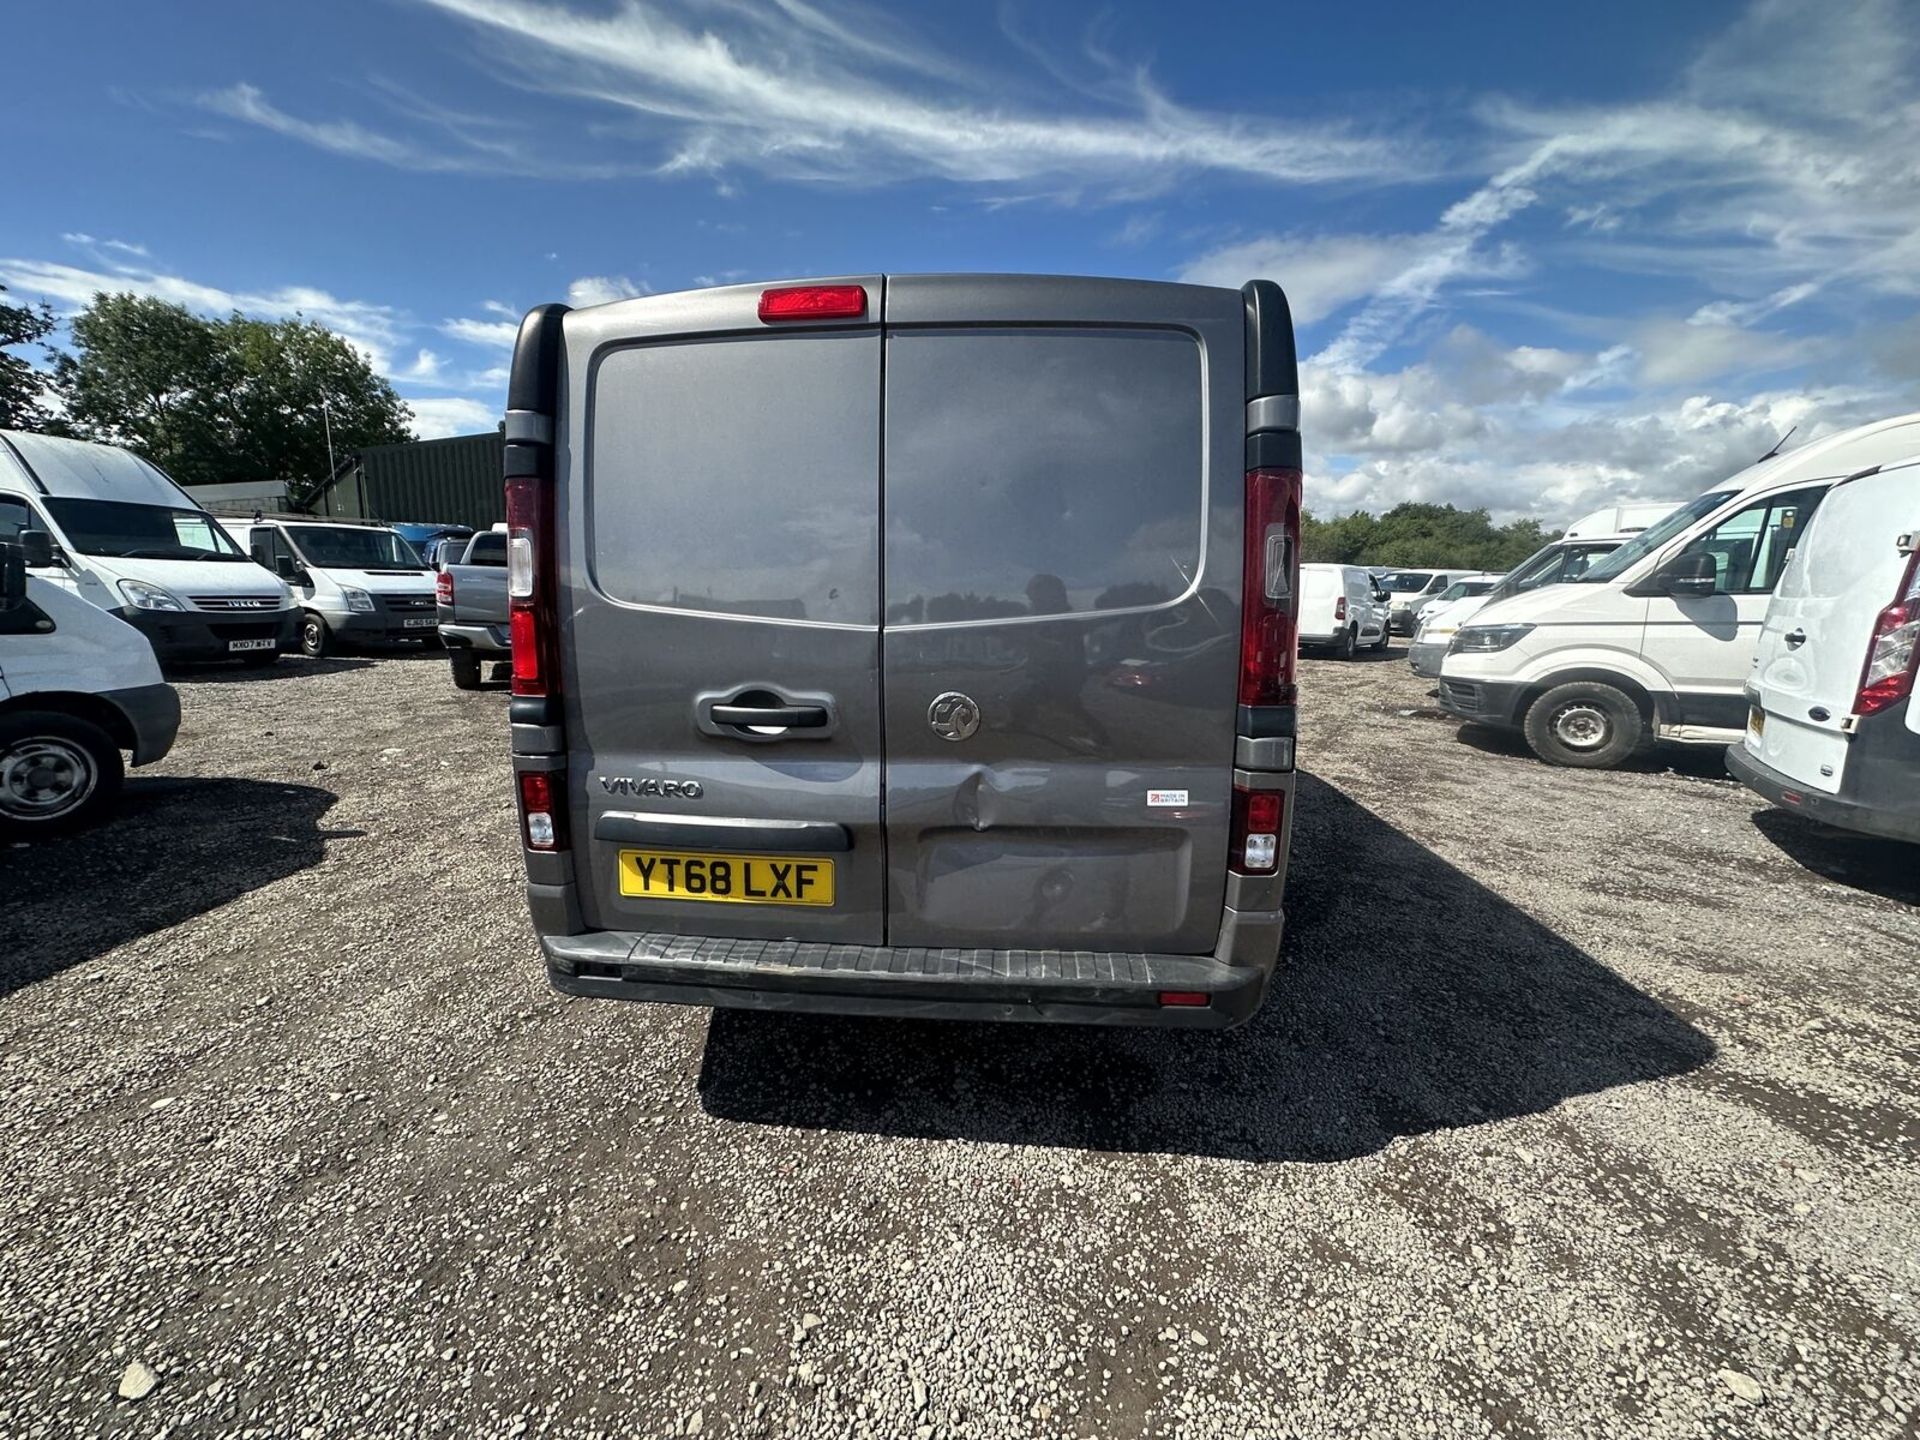 **(ONLY 70K MILEAGE)** MANUAL MARVEL: 2018 VAUXHALL VIVARO - CLEAR HPI, 0 FORMER KEEPERS - Image 4 of 15